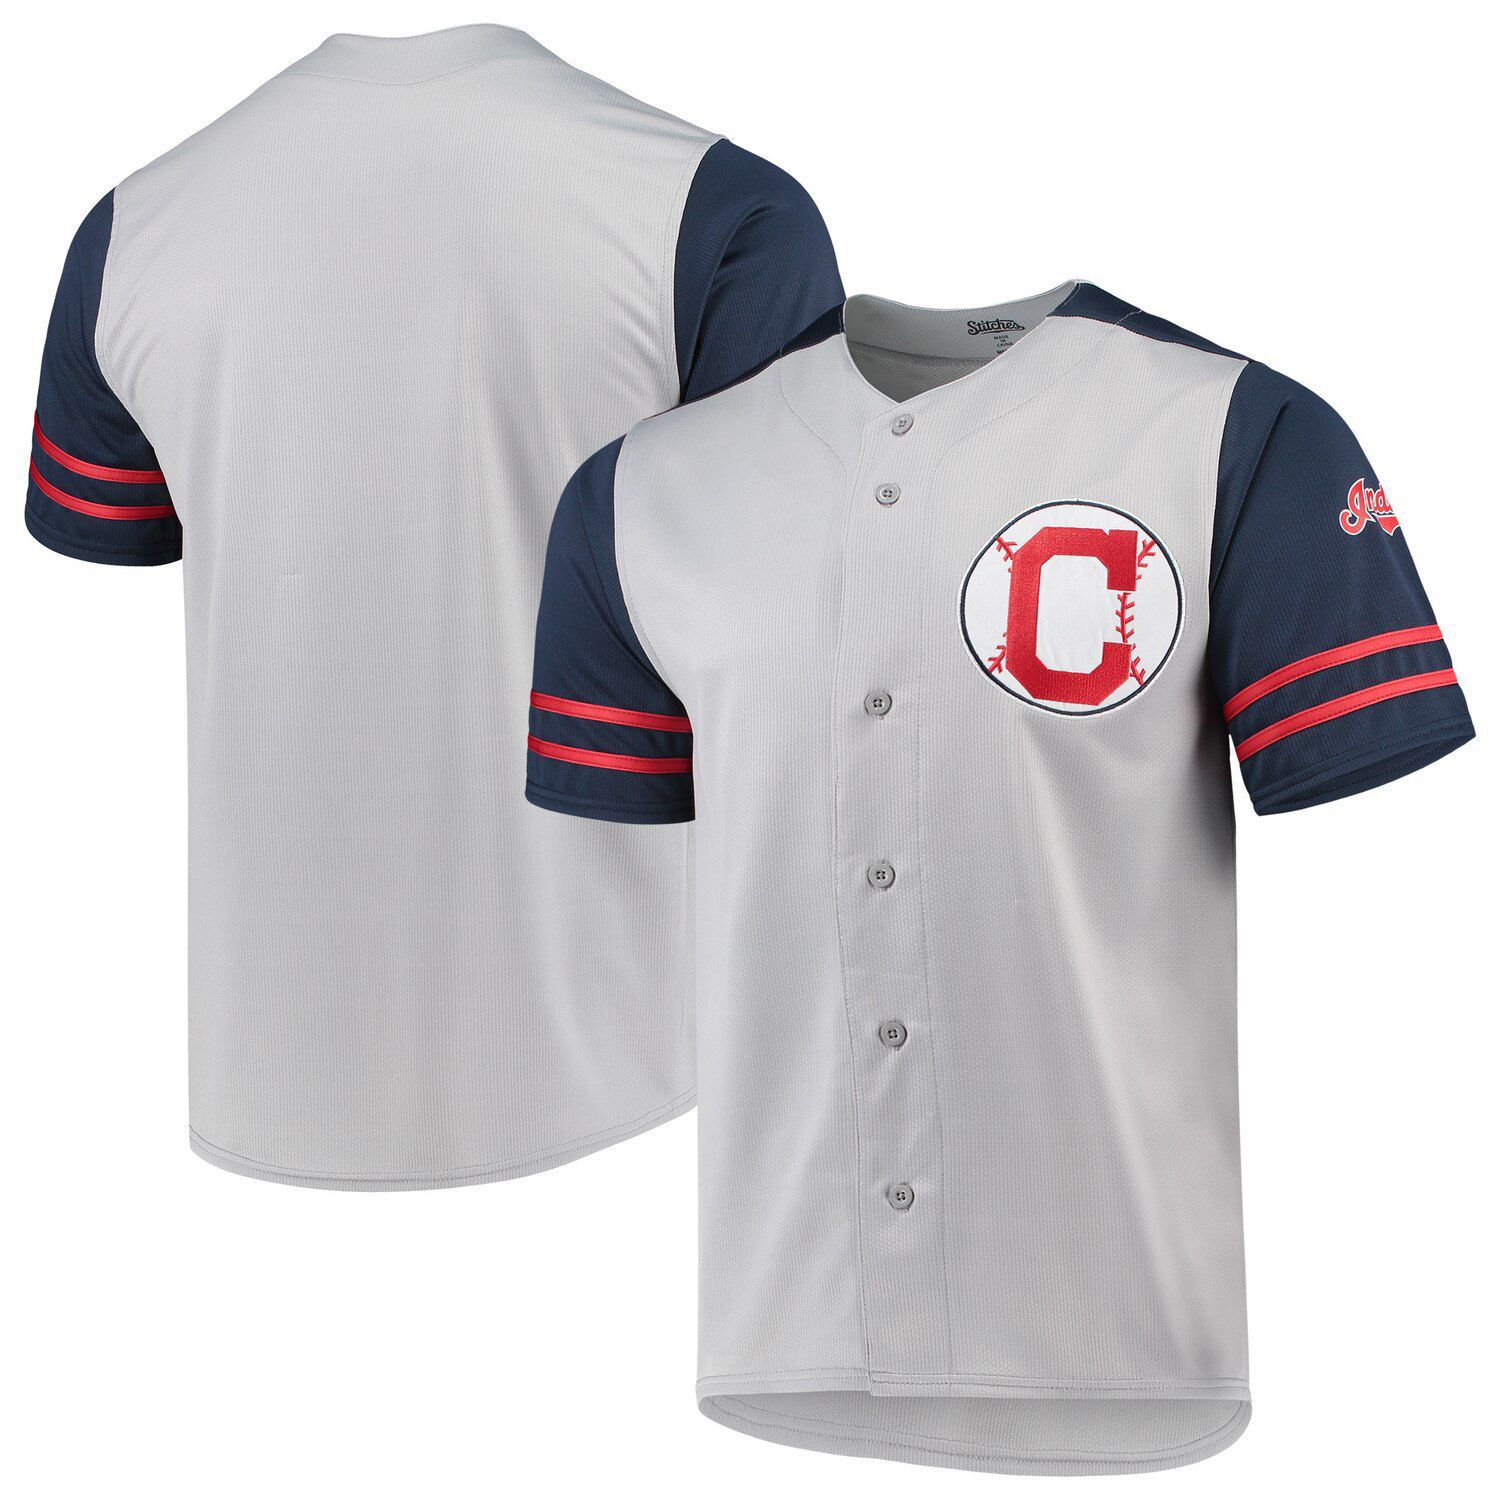 cleveland indians navy jersey